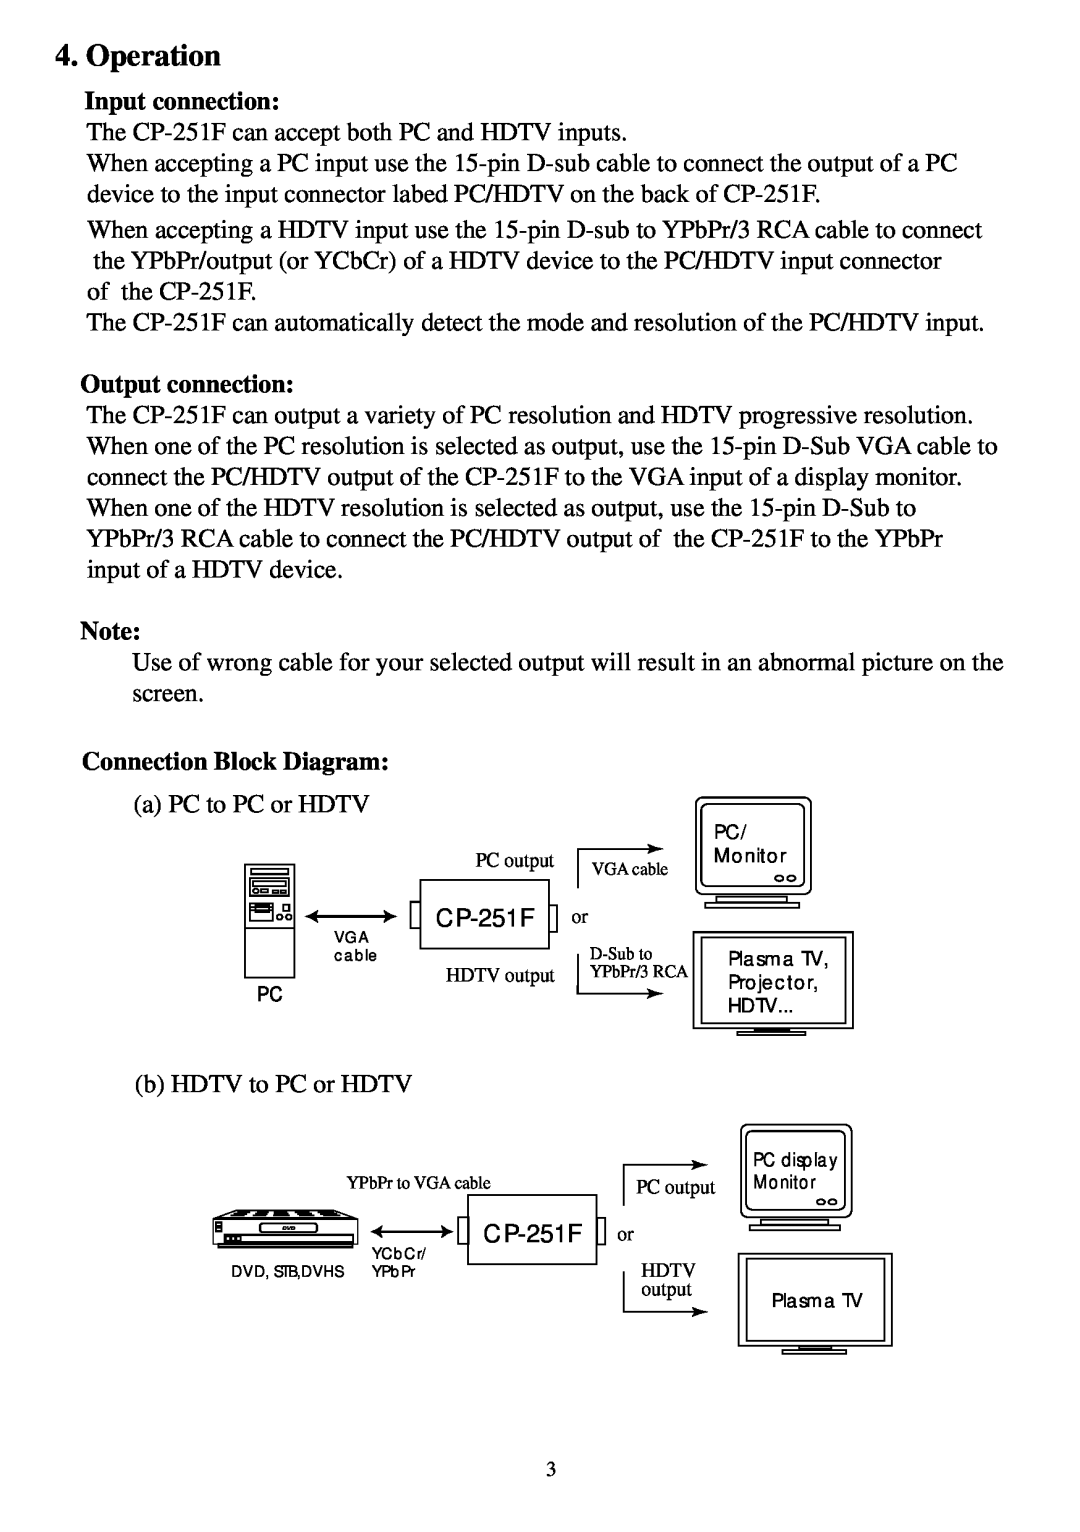 Video Products PC-HDTV-CNVTR operation manual Operation, Input connection, Output connection, Connection Block Diagram 